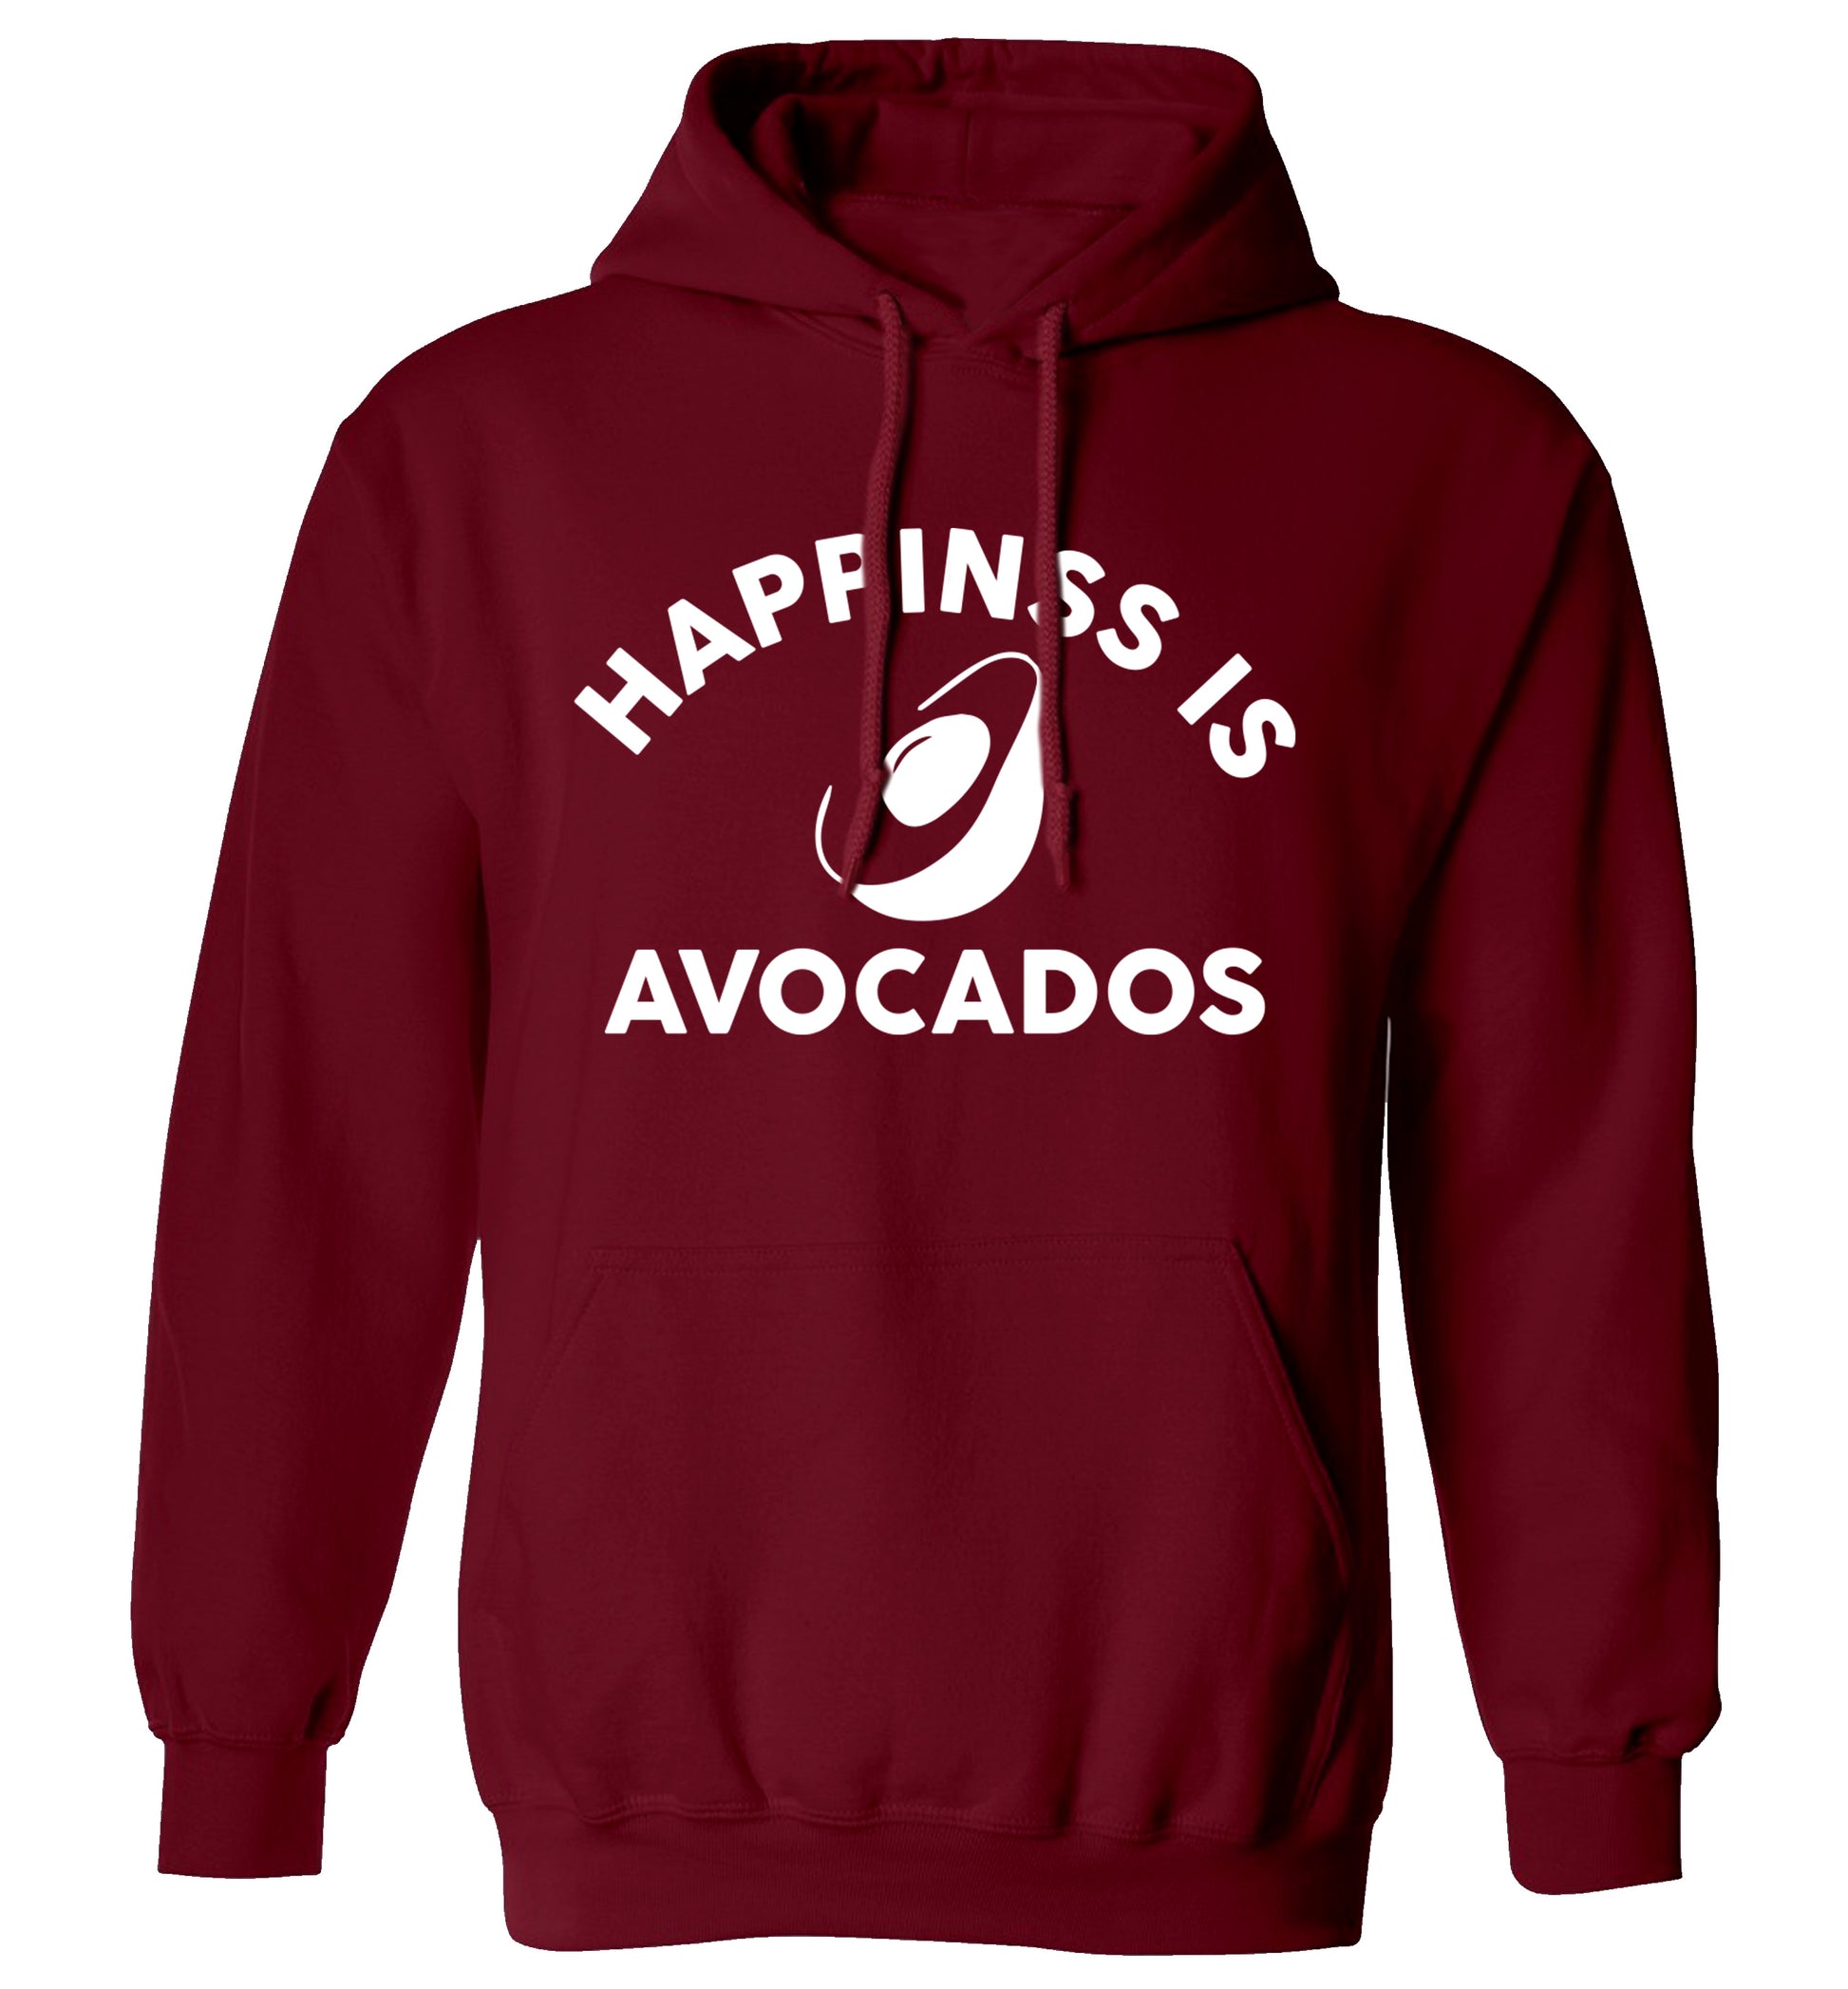 Happiness is avocados adults unisex maroon hoodie 2XL